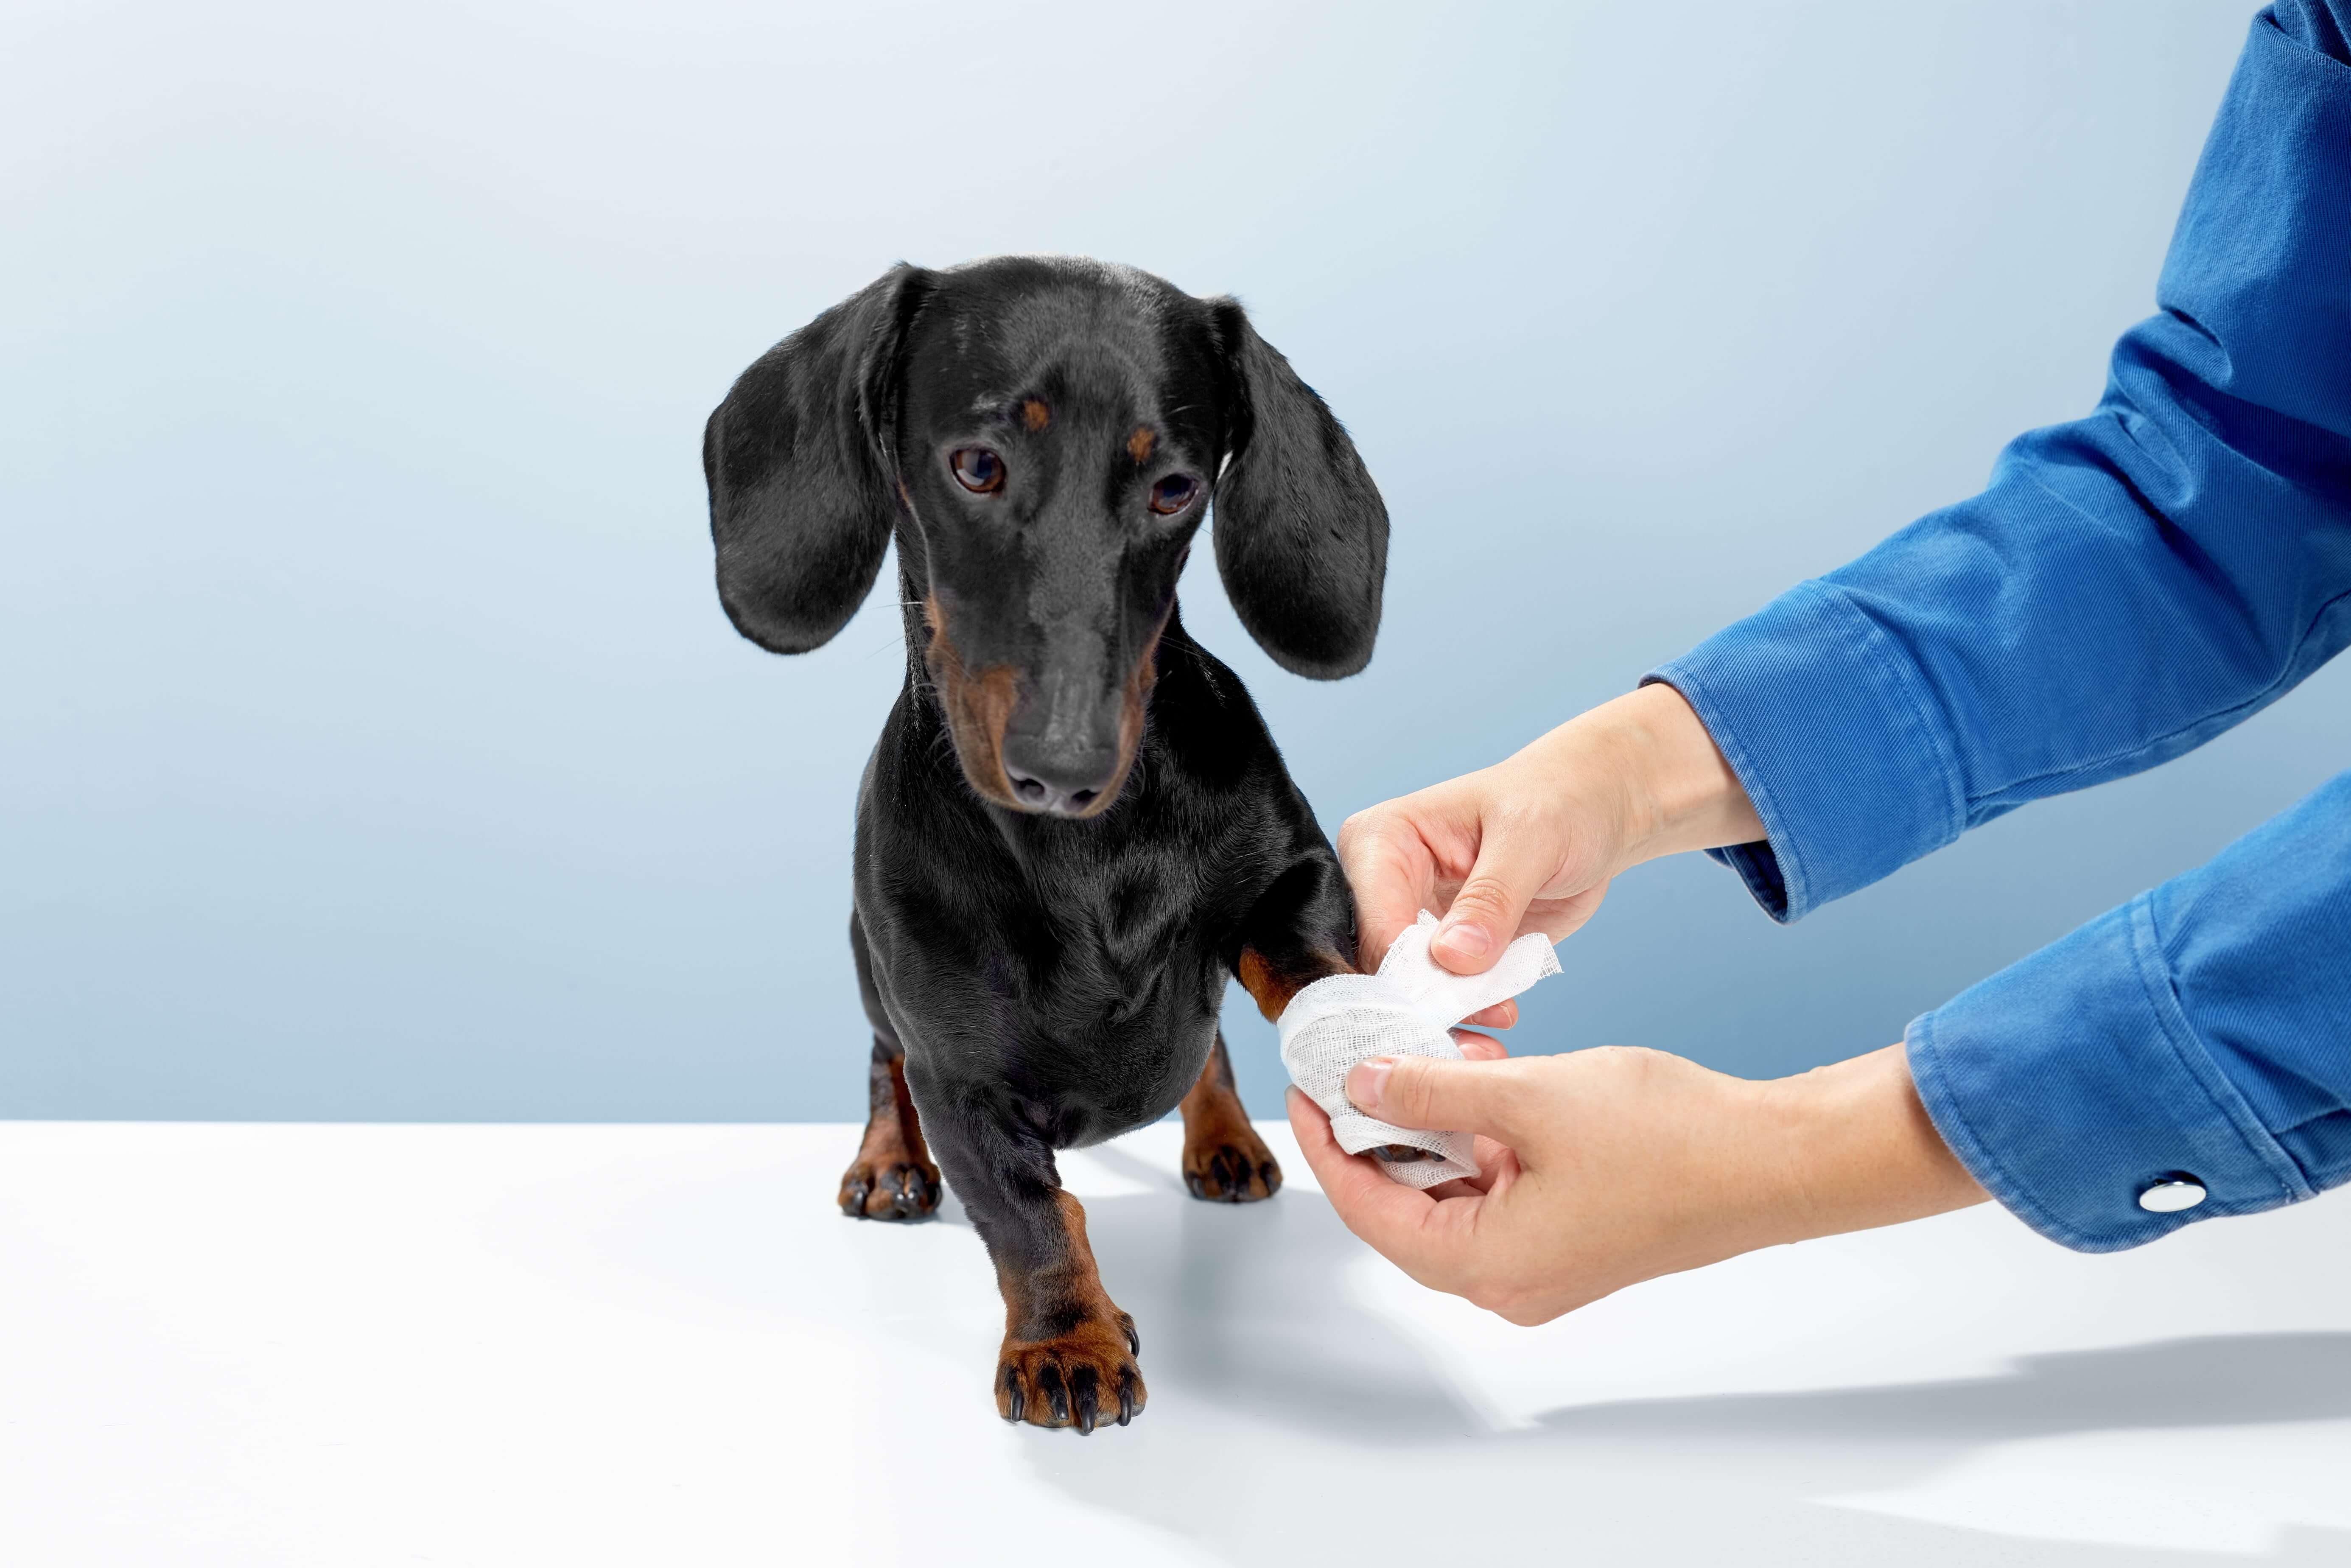 Treatments for Orthopaedic Problems in Pets in Dubai